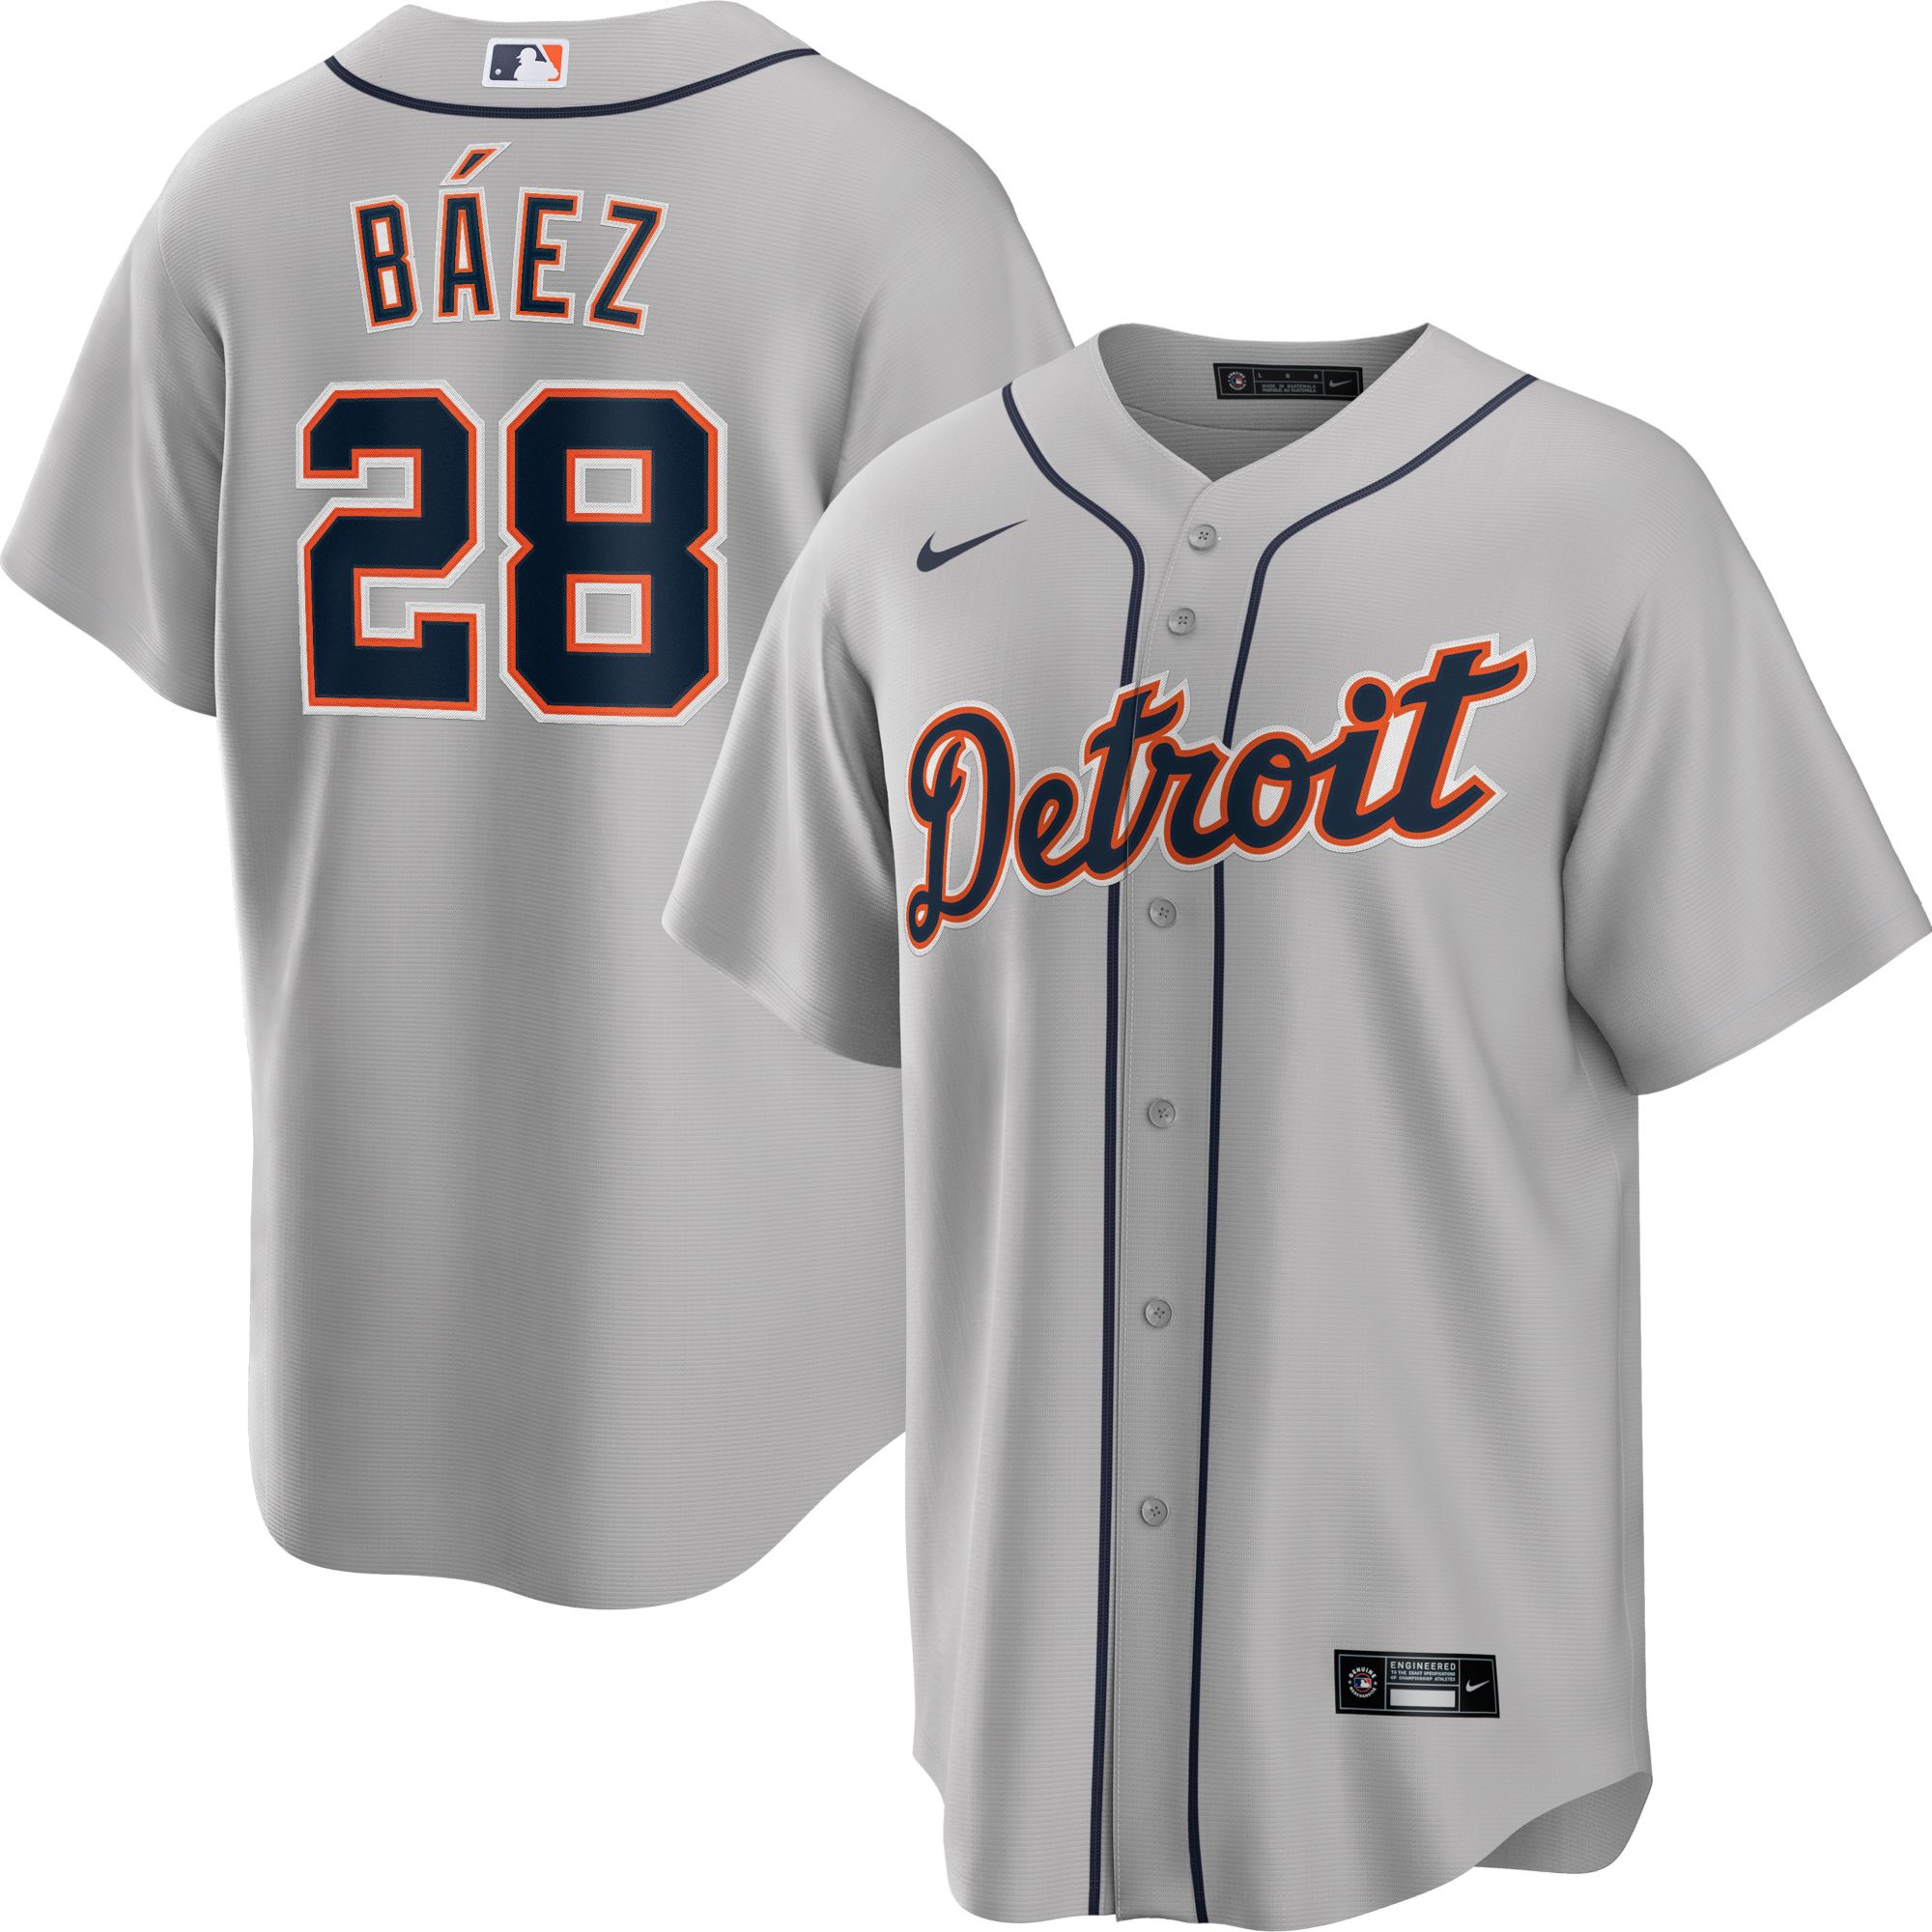 Tigers cool base jersey